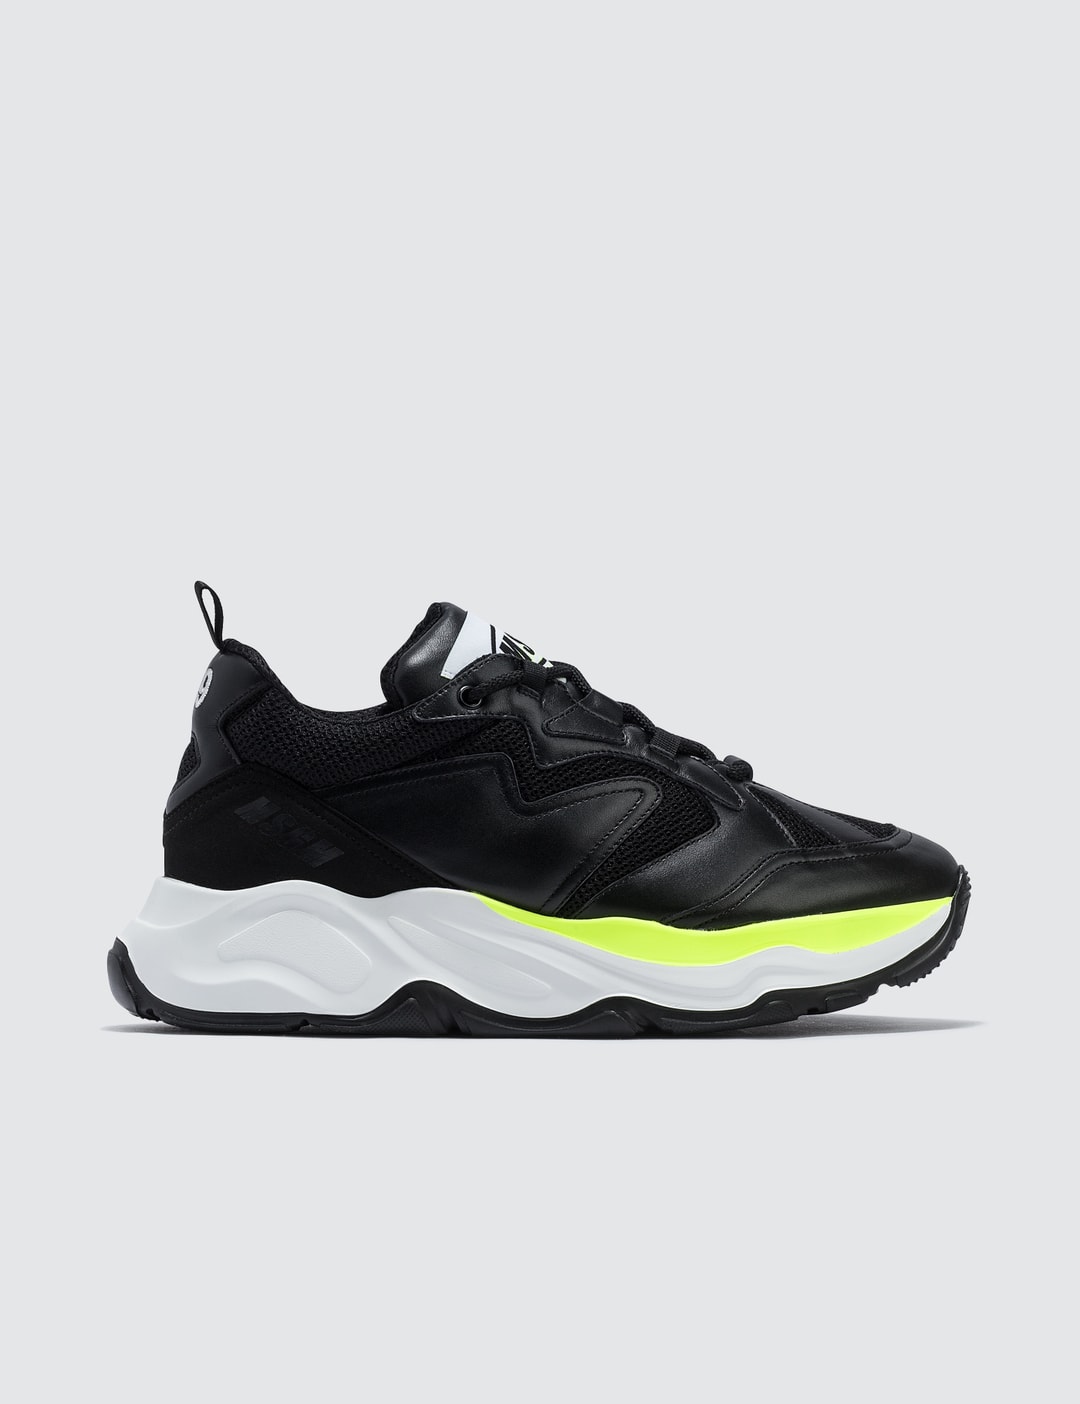 MSGM - Chunky Sneakers | HBX - Globally Curated Fashion and Lifestyle ...